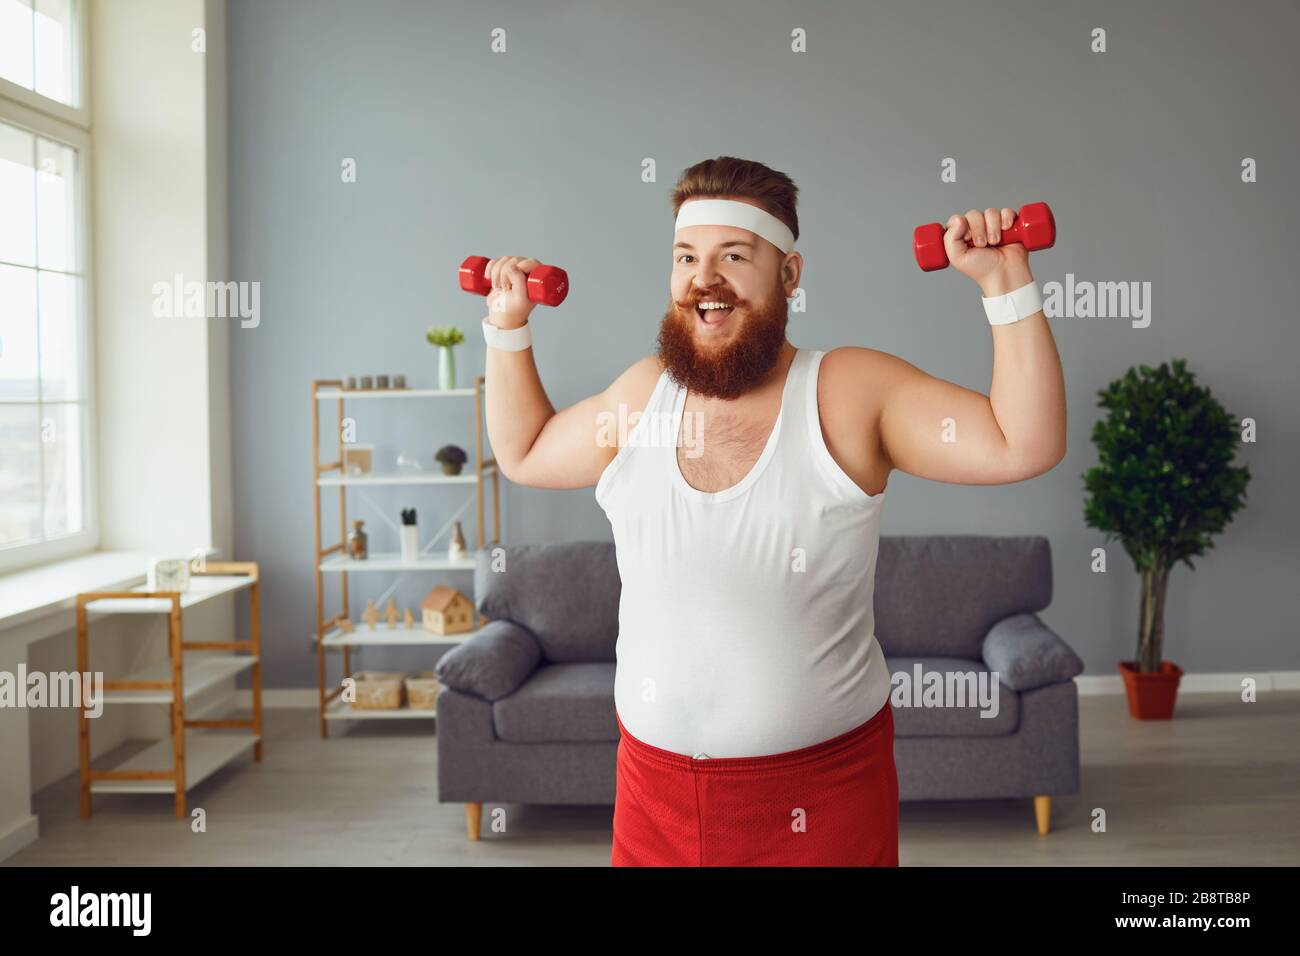 Funny fat man with dumbbells doing exercises in the room. Stock Photo